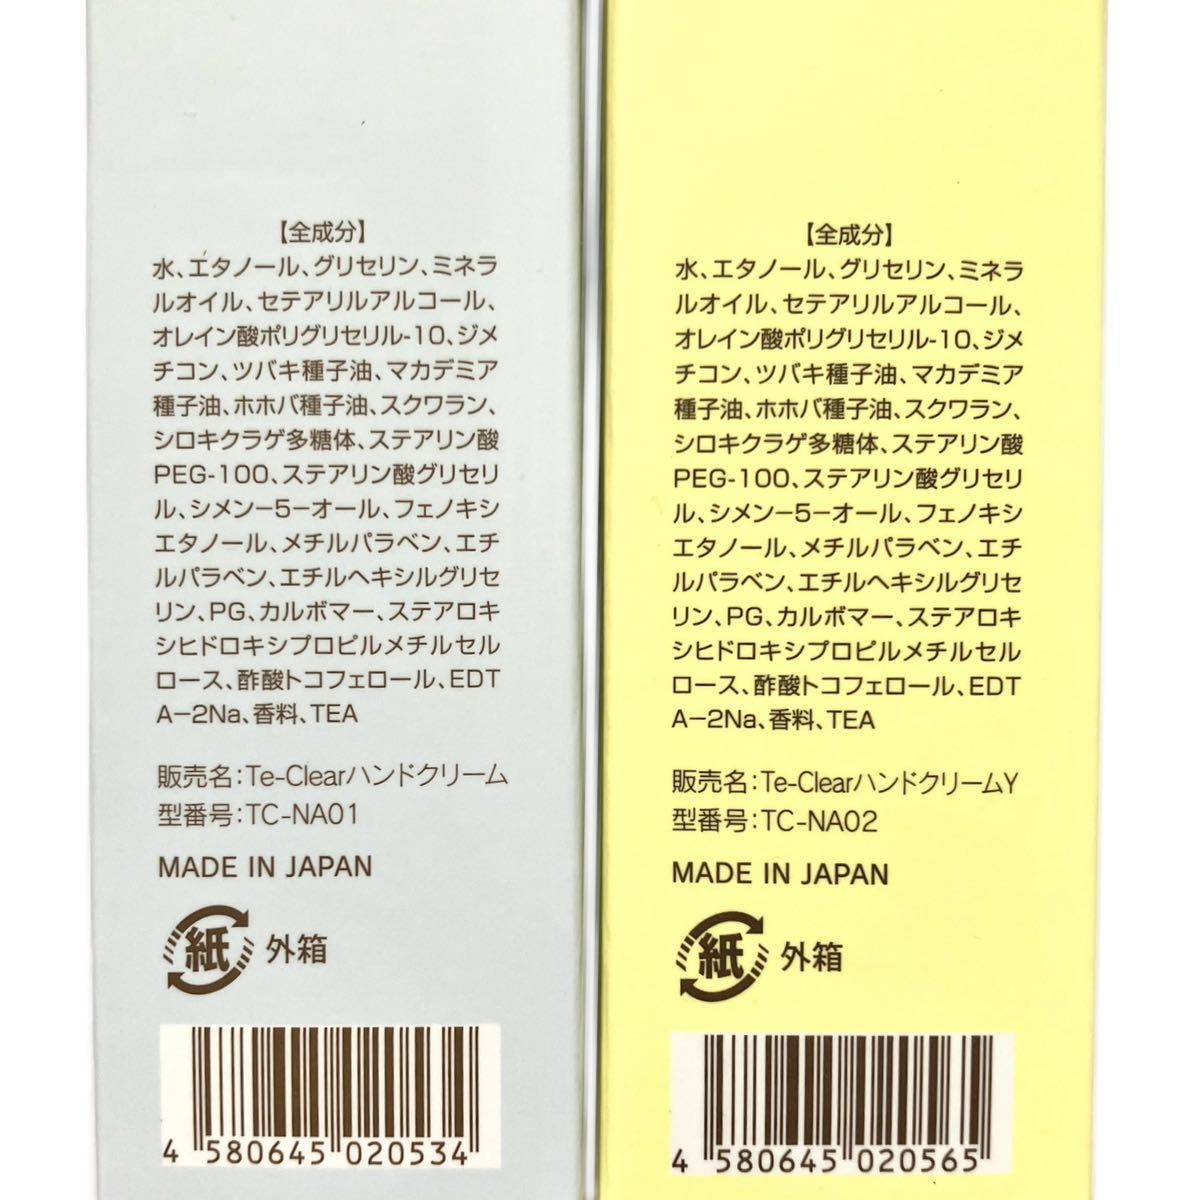  new goods * Te-Clear hand cream * camellia oil combination * made in Japan * floral * yuzu * 2 kind * 2 pcs set * free shipping 